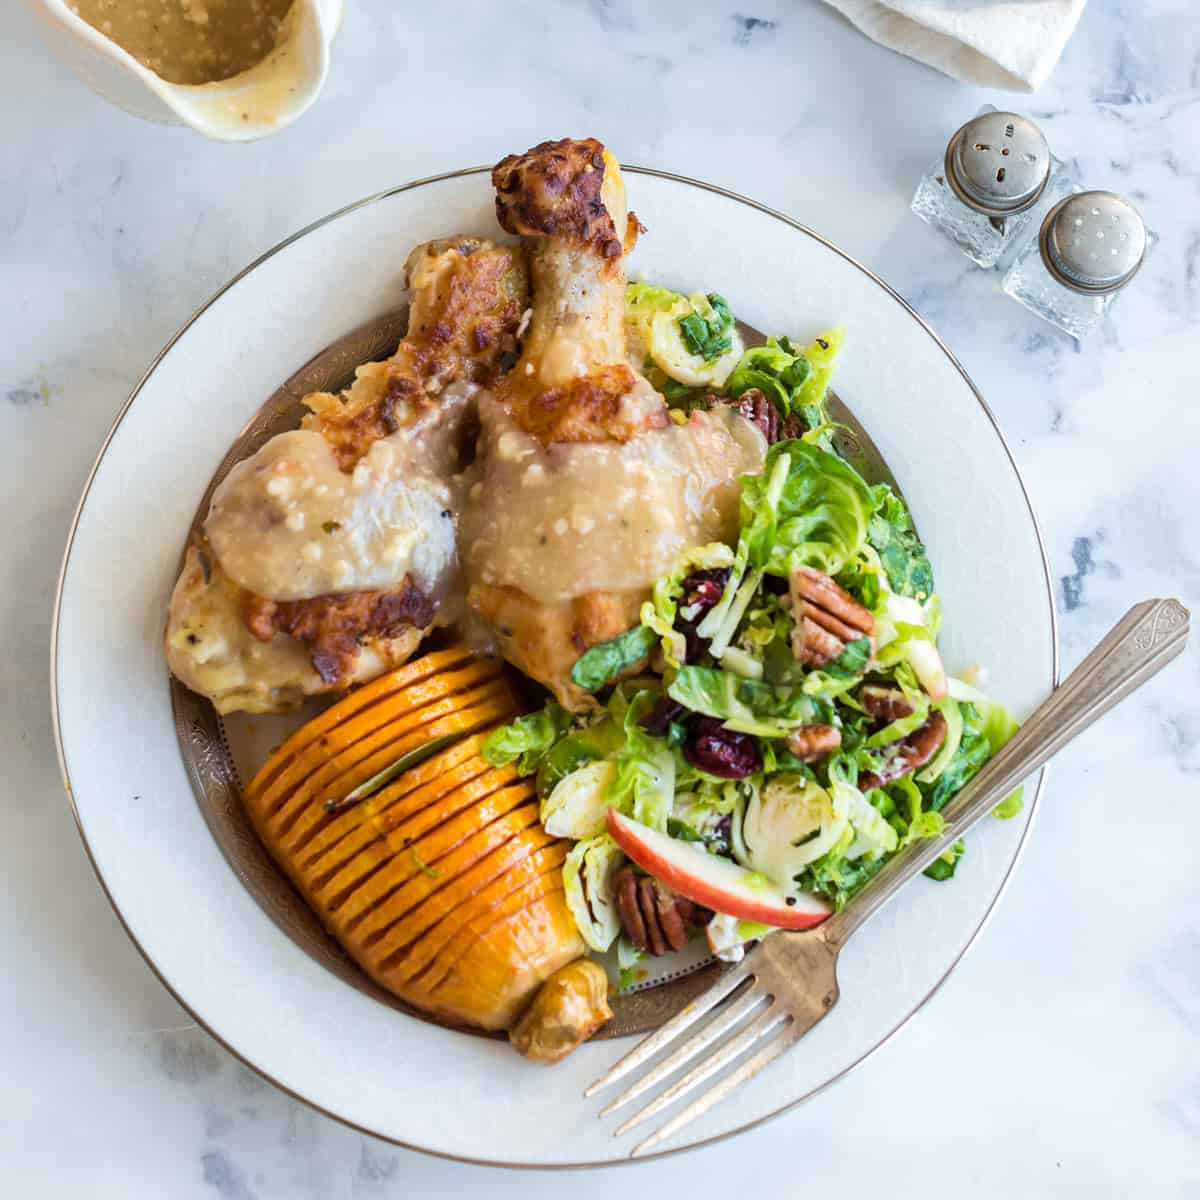 A plate of food with chicken and salad.